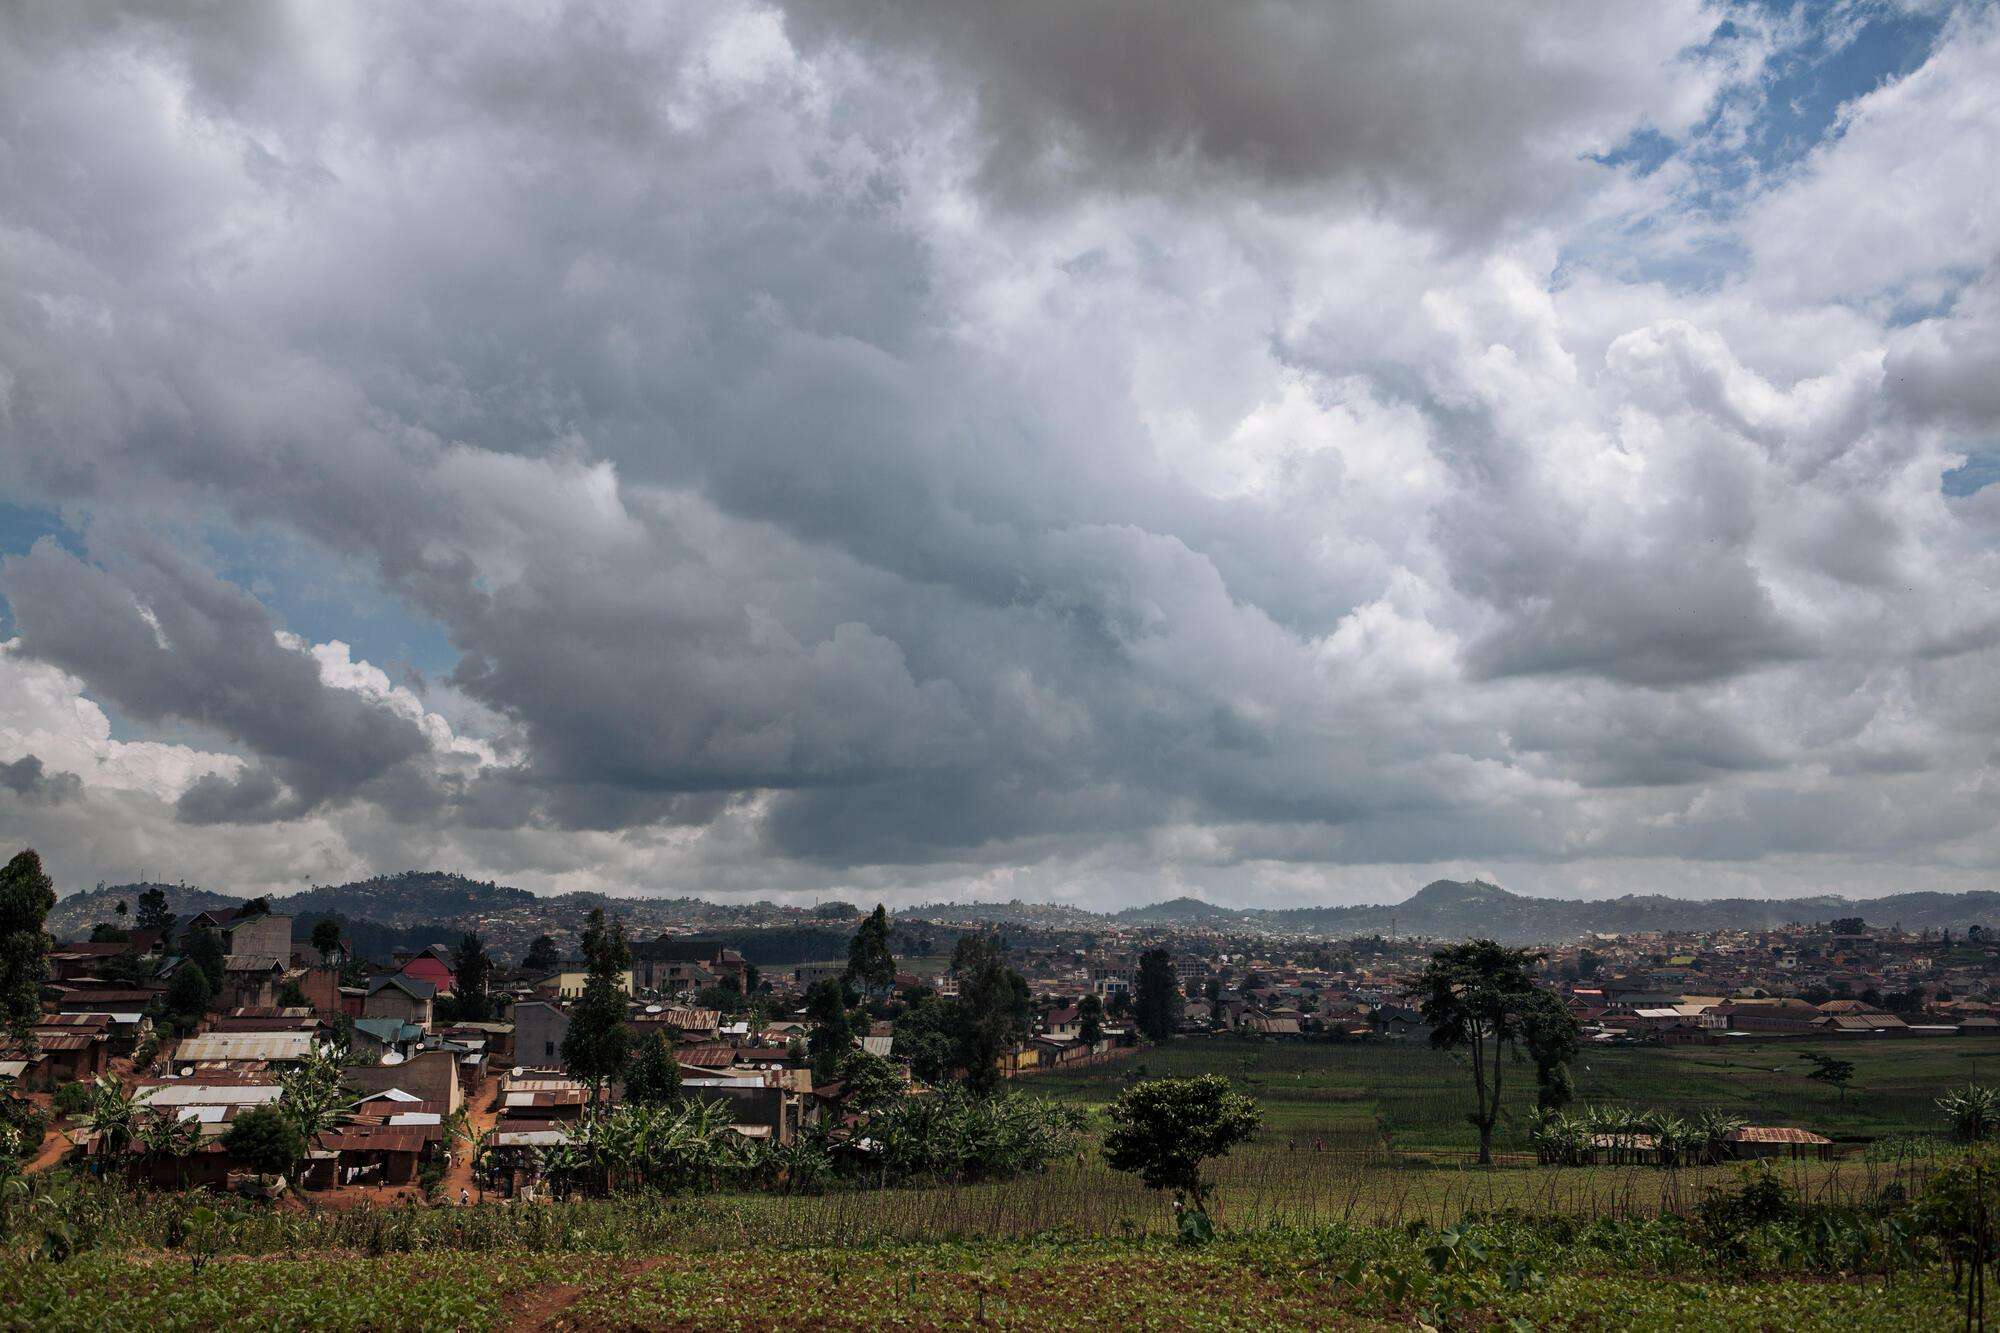 Butembo and its surroundings, the new epicentre of the outbreak